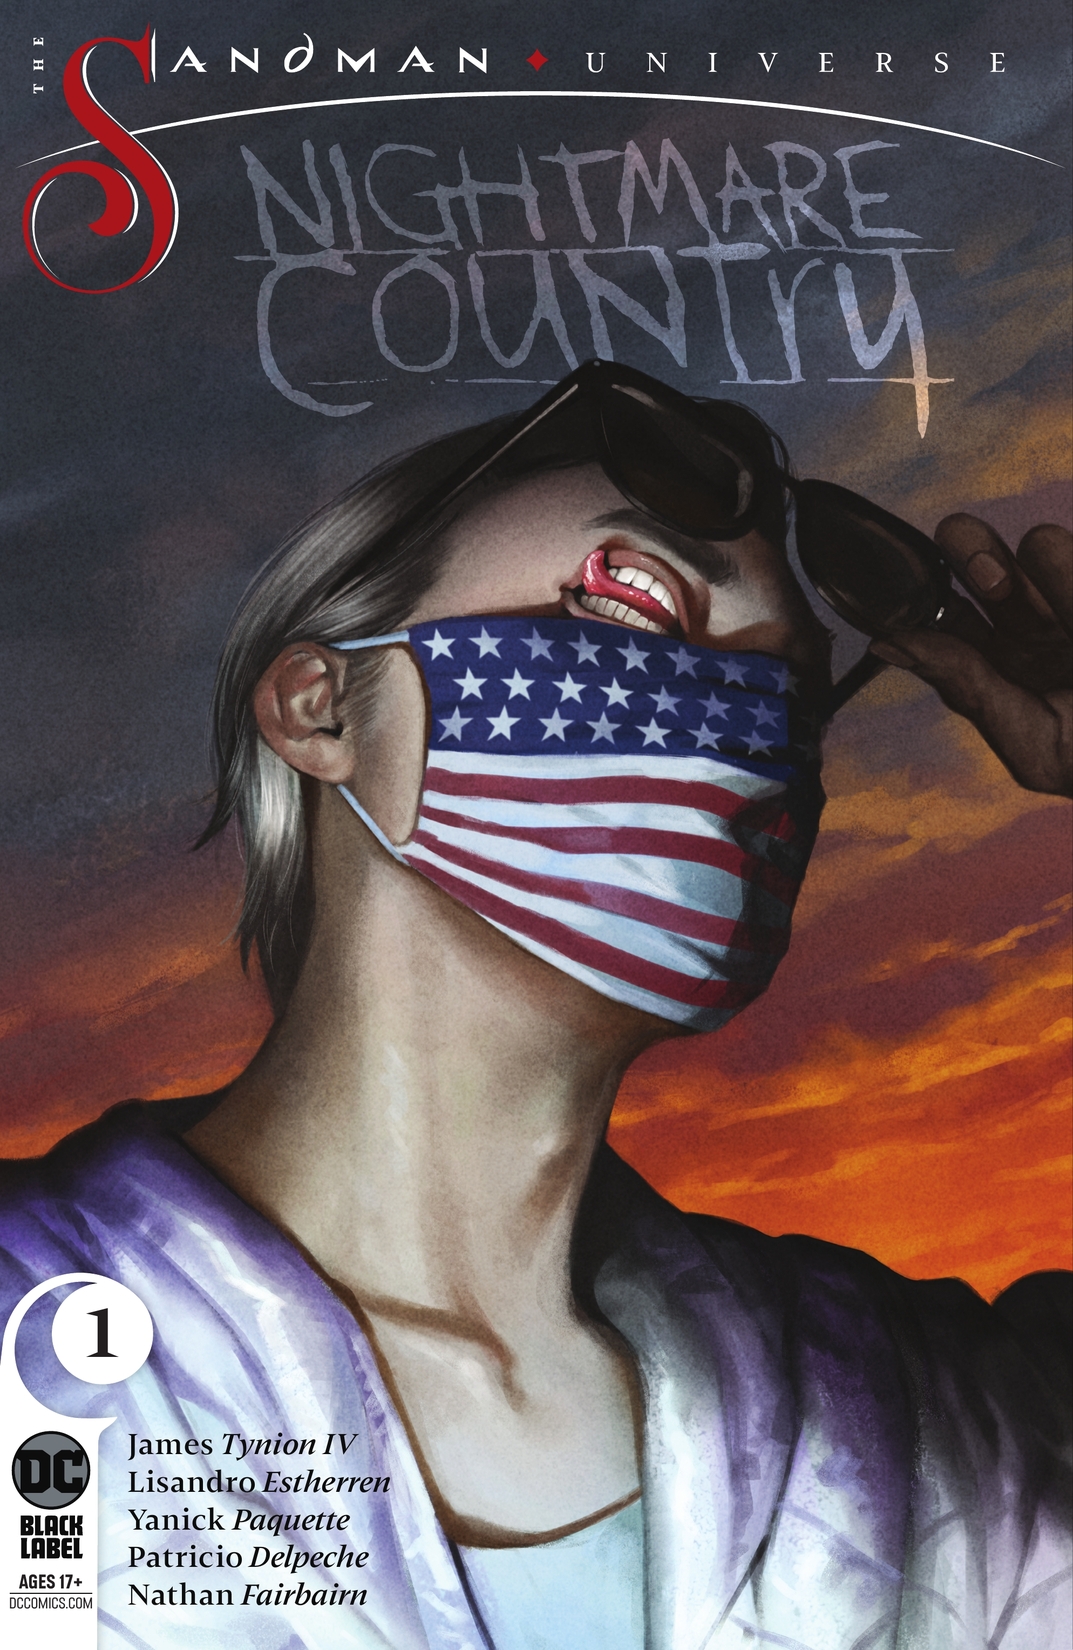 The Sandman Universe: Nightmare Country #1 preview images